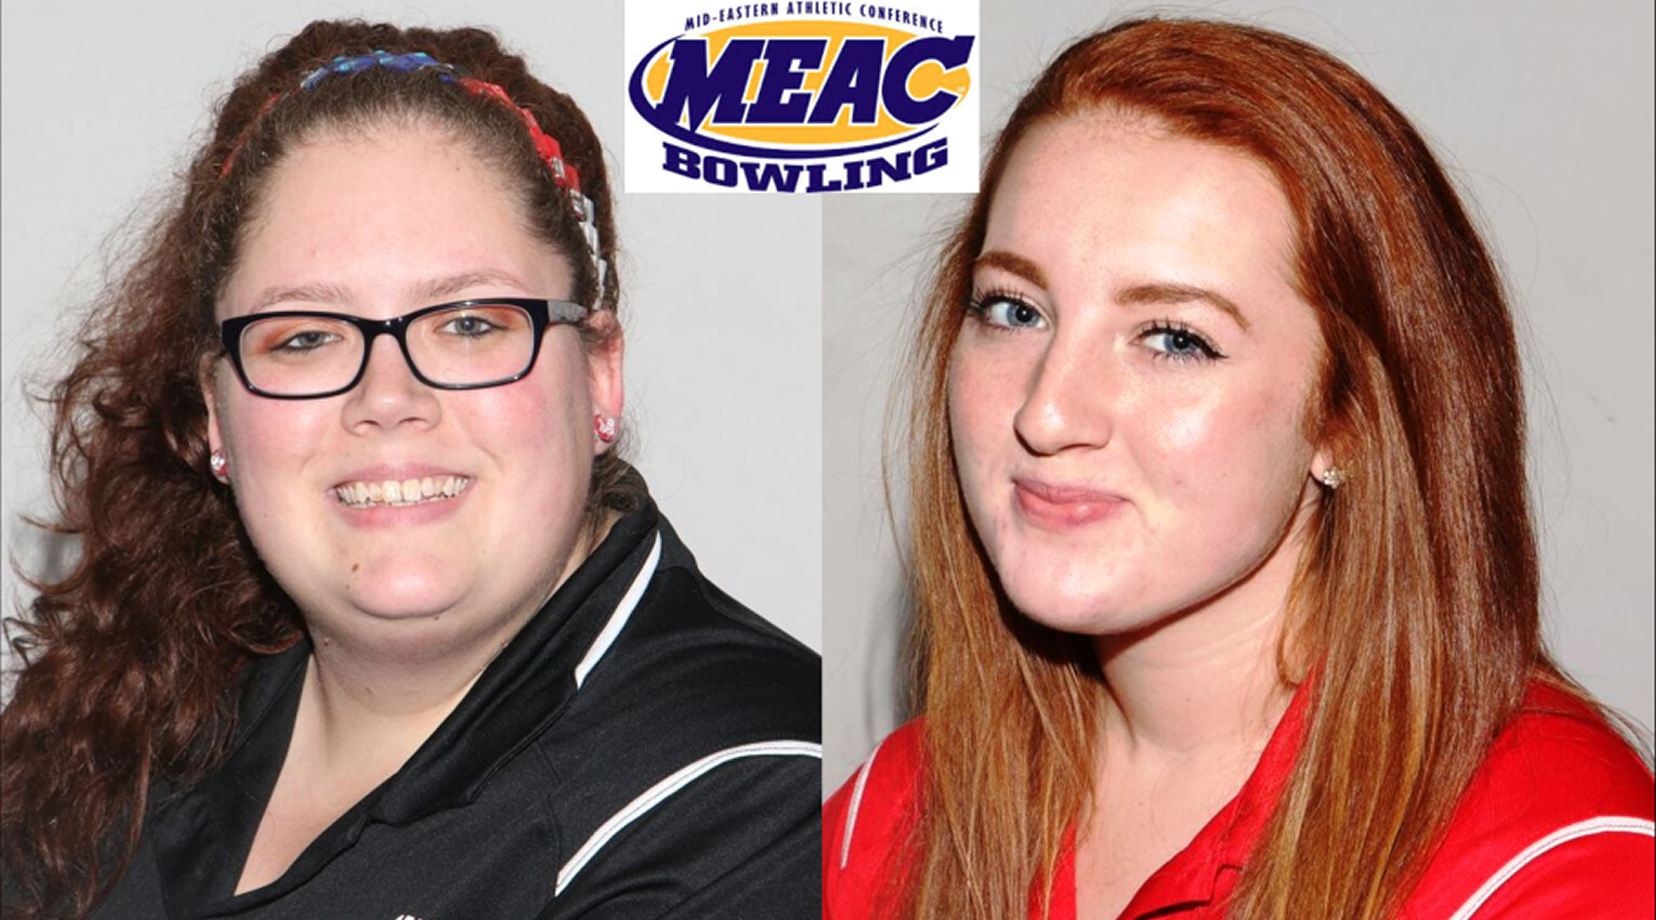 Kayla Stamm, MEAC Coach-of-the-Year. Alexis Neuer, league’s 2017-18 Bowler-of-the-Year.